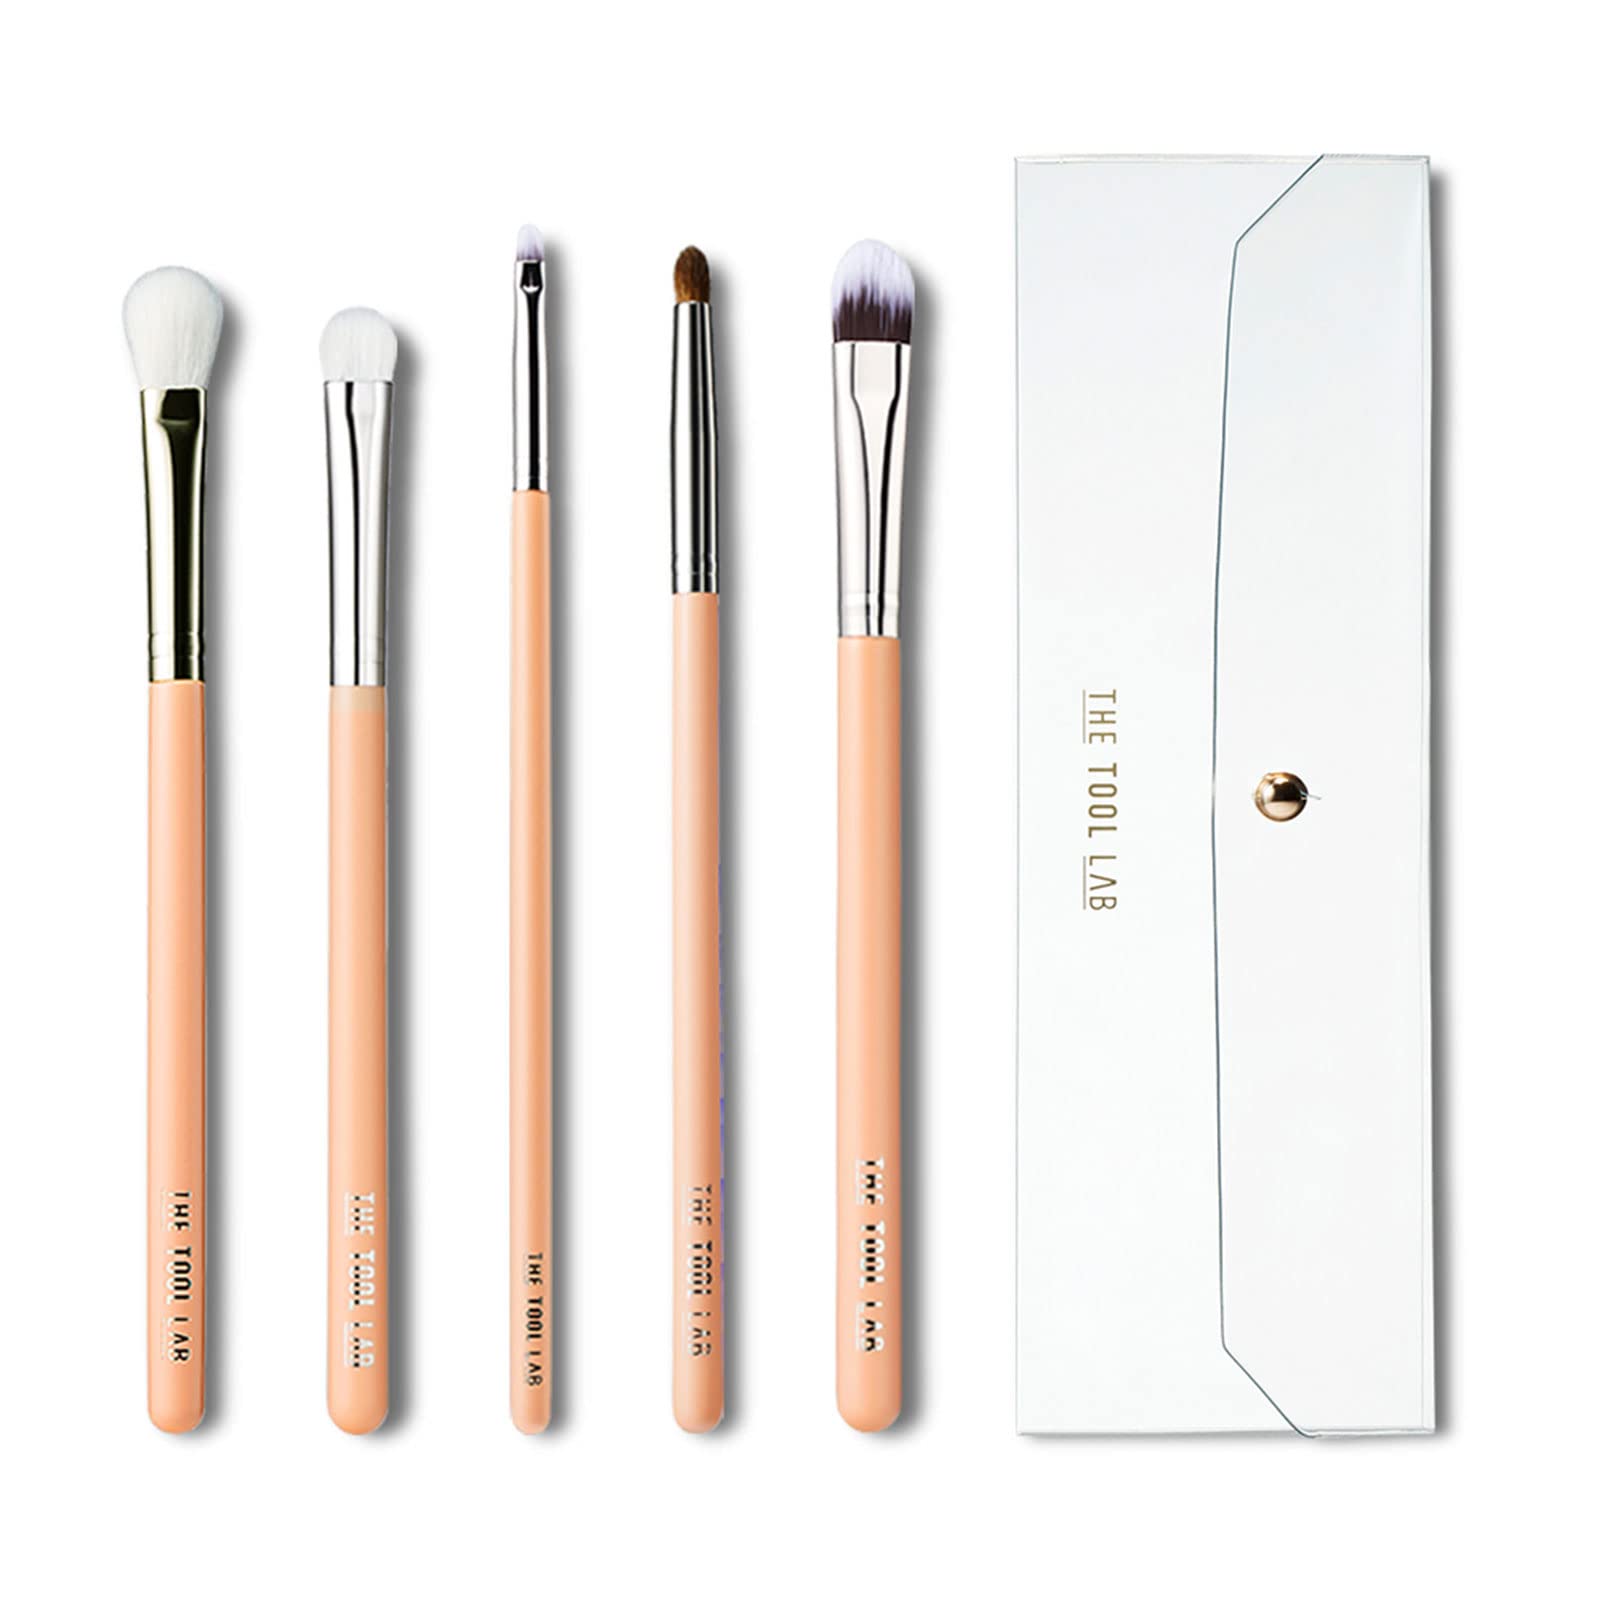 THE TOOL LAB 404 Eye Shadow Makeup Brush Pouch Set - Angled Precision  Define Brushes Eyeliner Blending Definer Professional conc